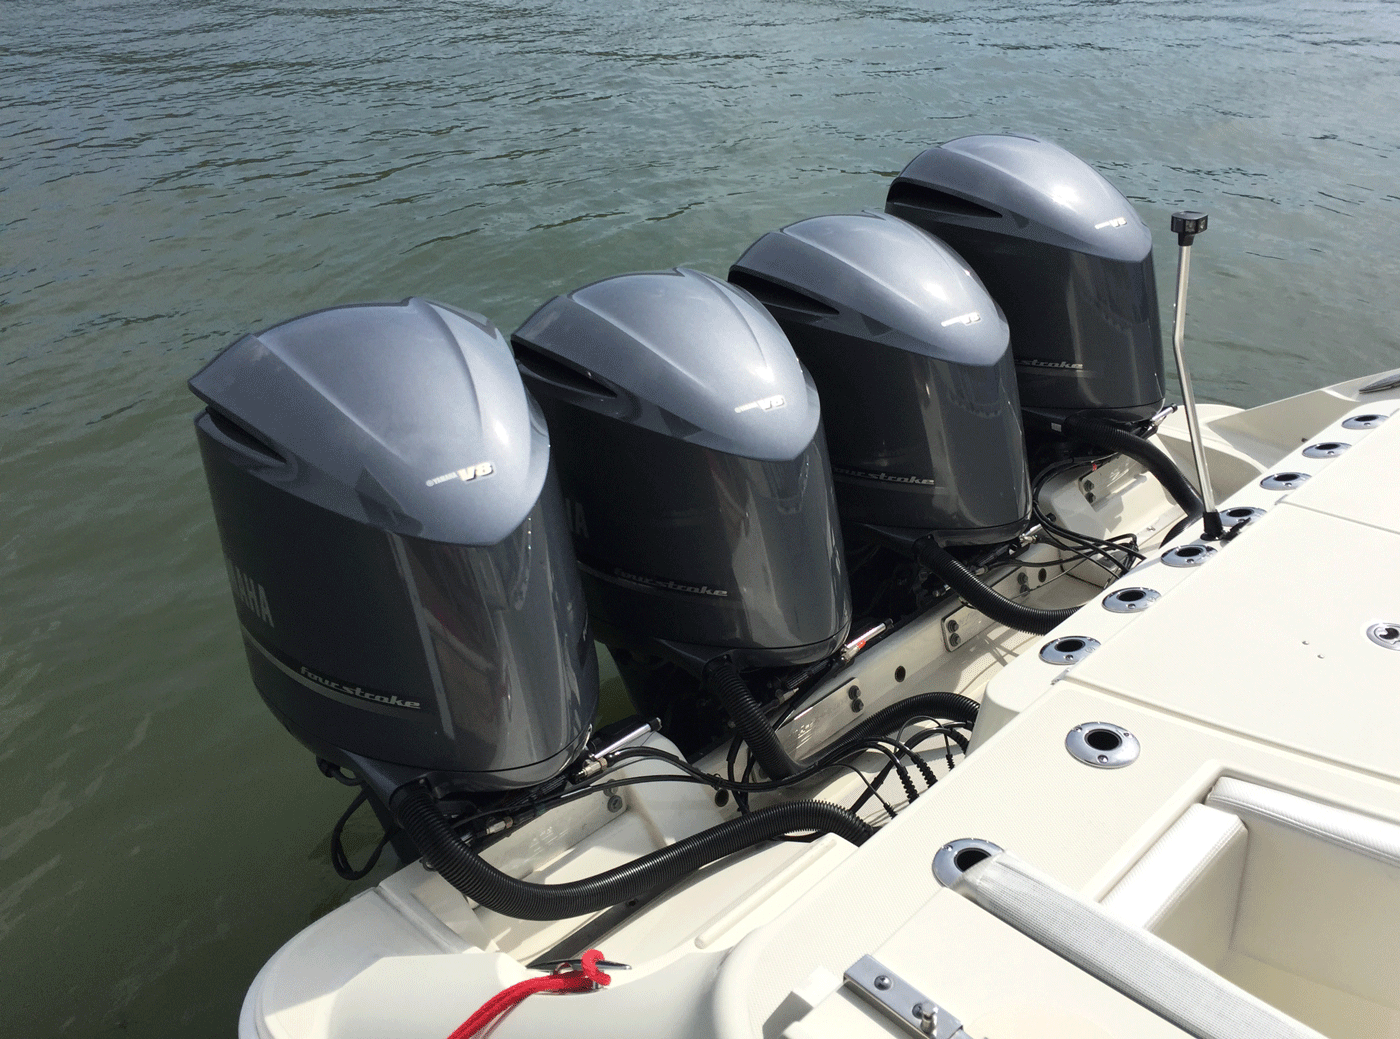 boat winterize outboard engine boats jet winter winterization unit four air lay outboards whether got ve mastercraft need frequently asked